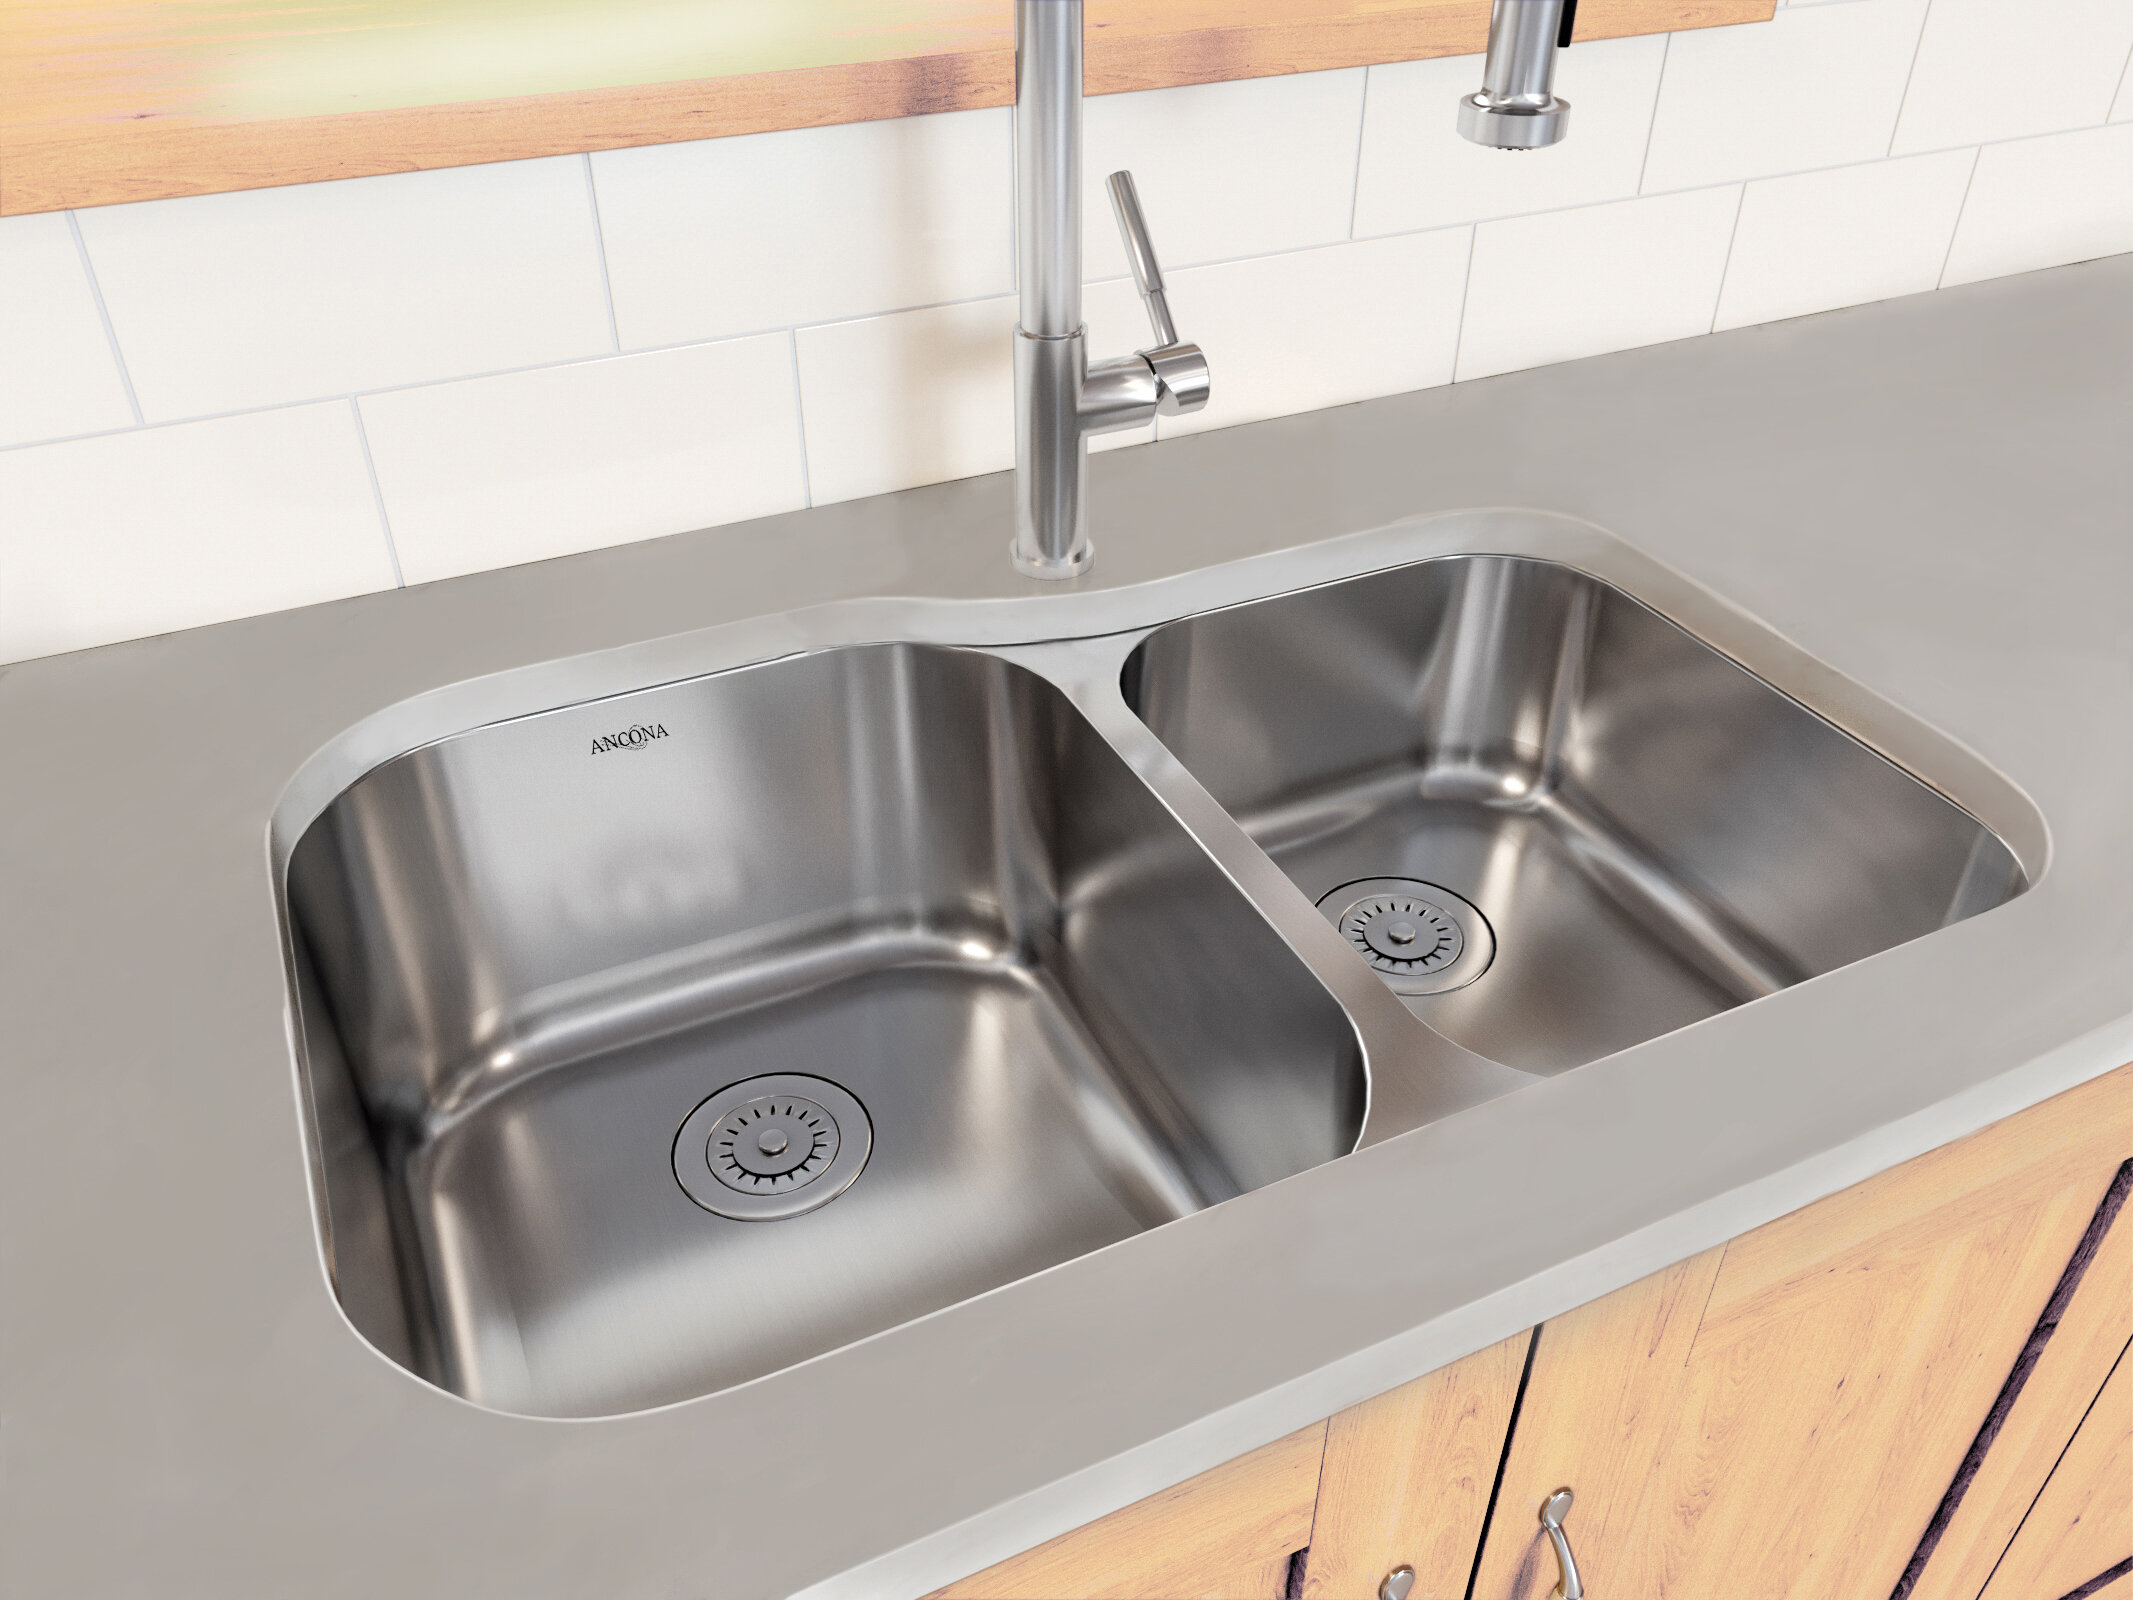 Ancona Capri Series Stainless Steel 3175 L X 206 W 60 40 Double Bowl Undermount Kitchen Sink With Grid And Strainers Wayfair